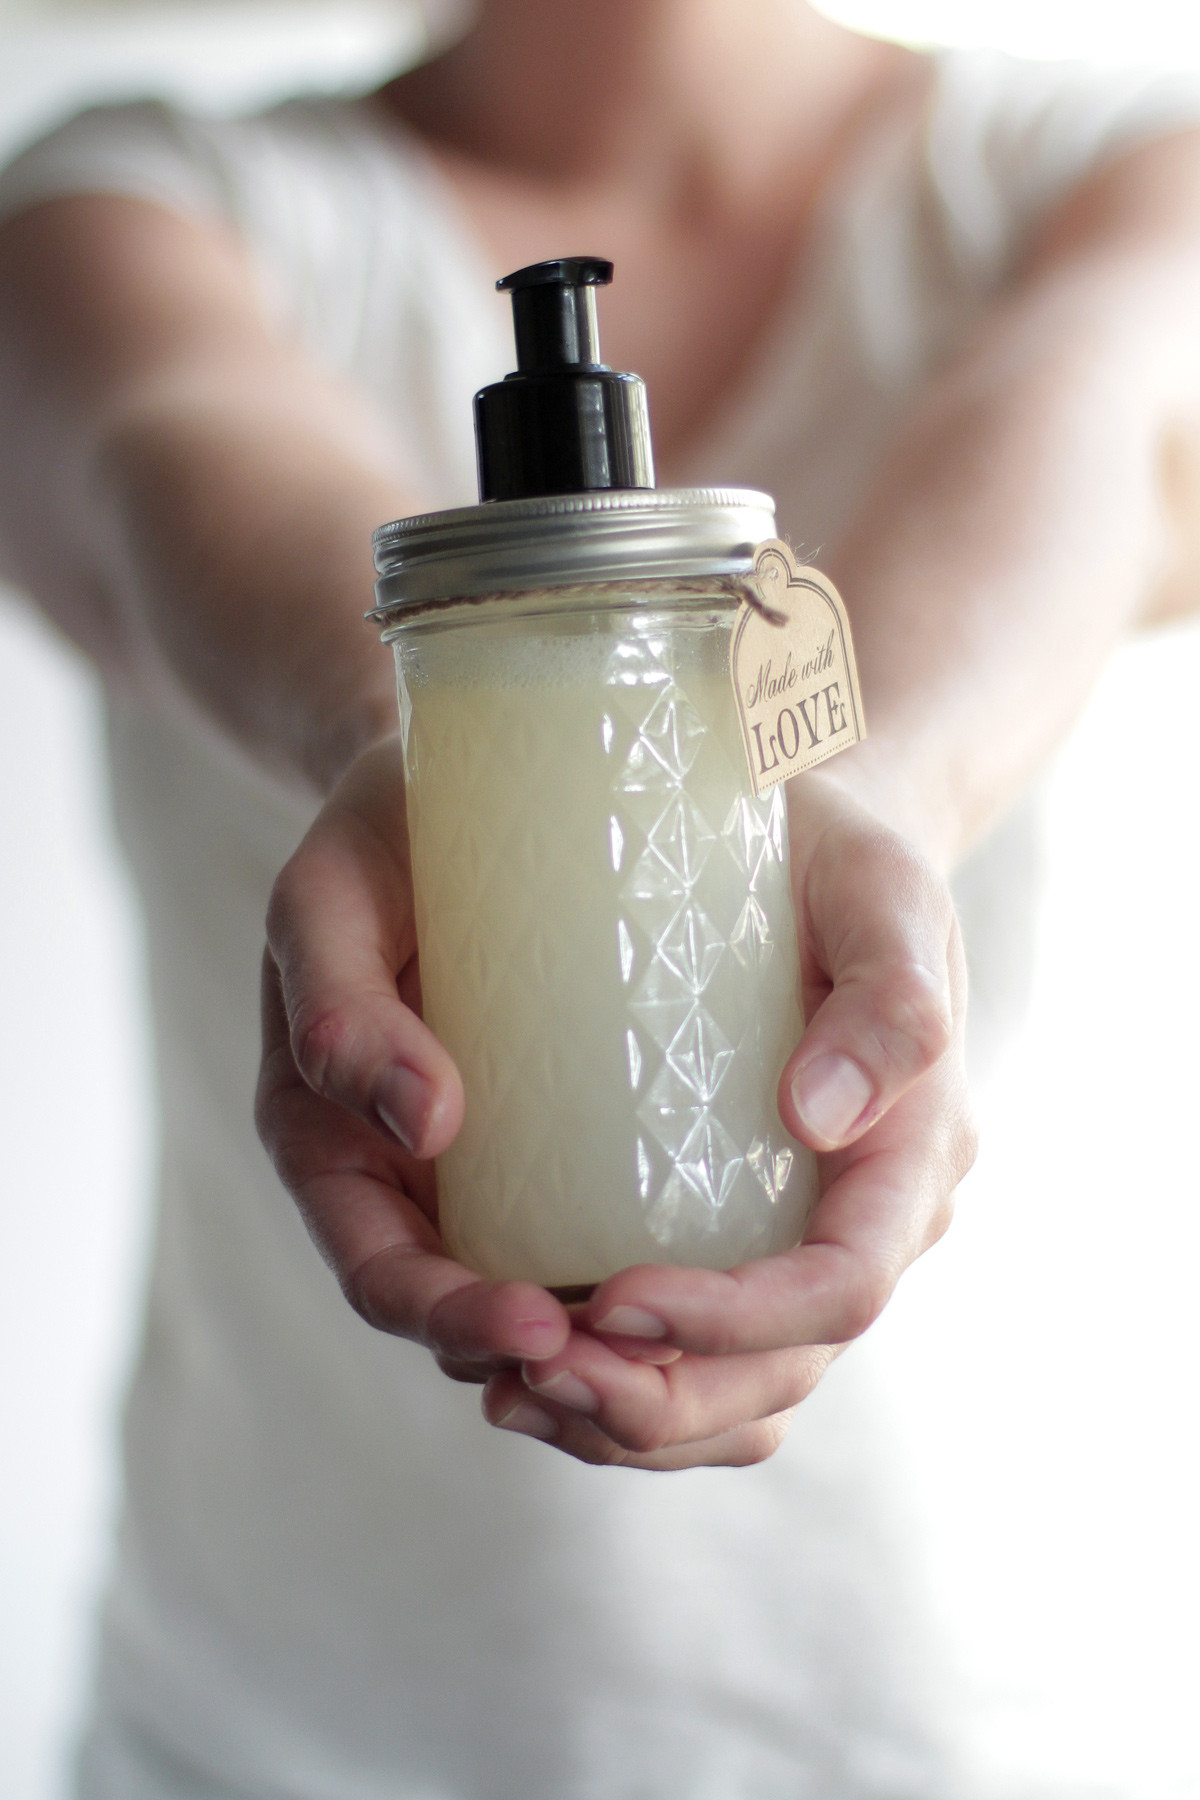 Best ideas about DIY Hand Soap . Save or Pin DIY Homemade Liquid Hand Soap Live Simply Now.